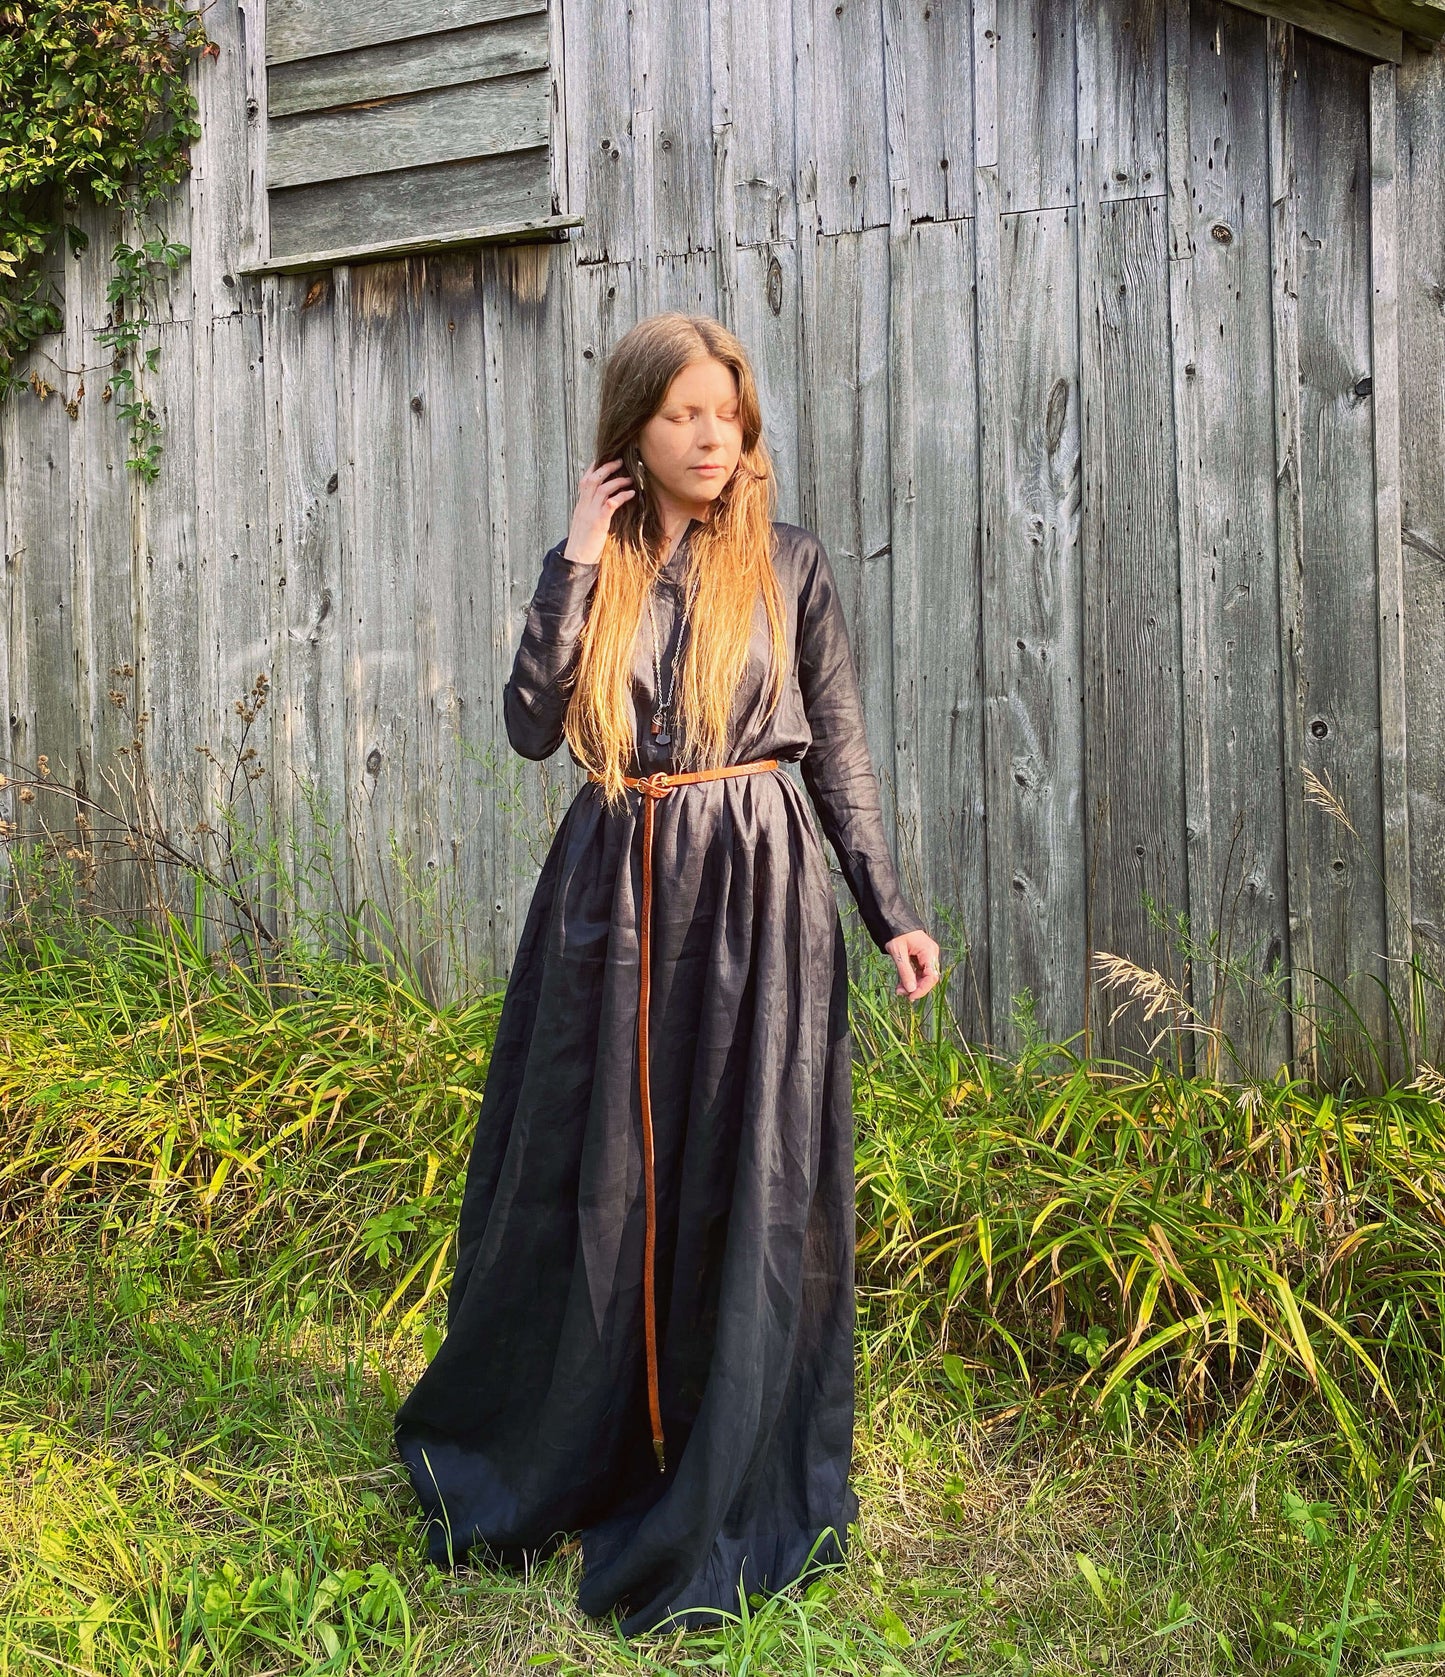 Featuring our Iron age, long sleeve tunic dress in black linen. Model is wearing it with a thin leather belt with a barn in the background.